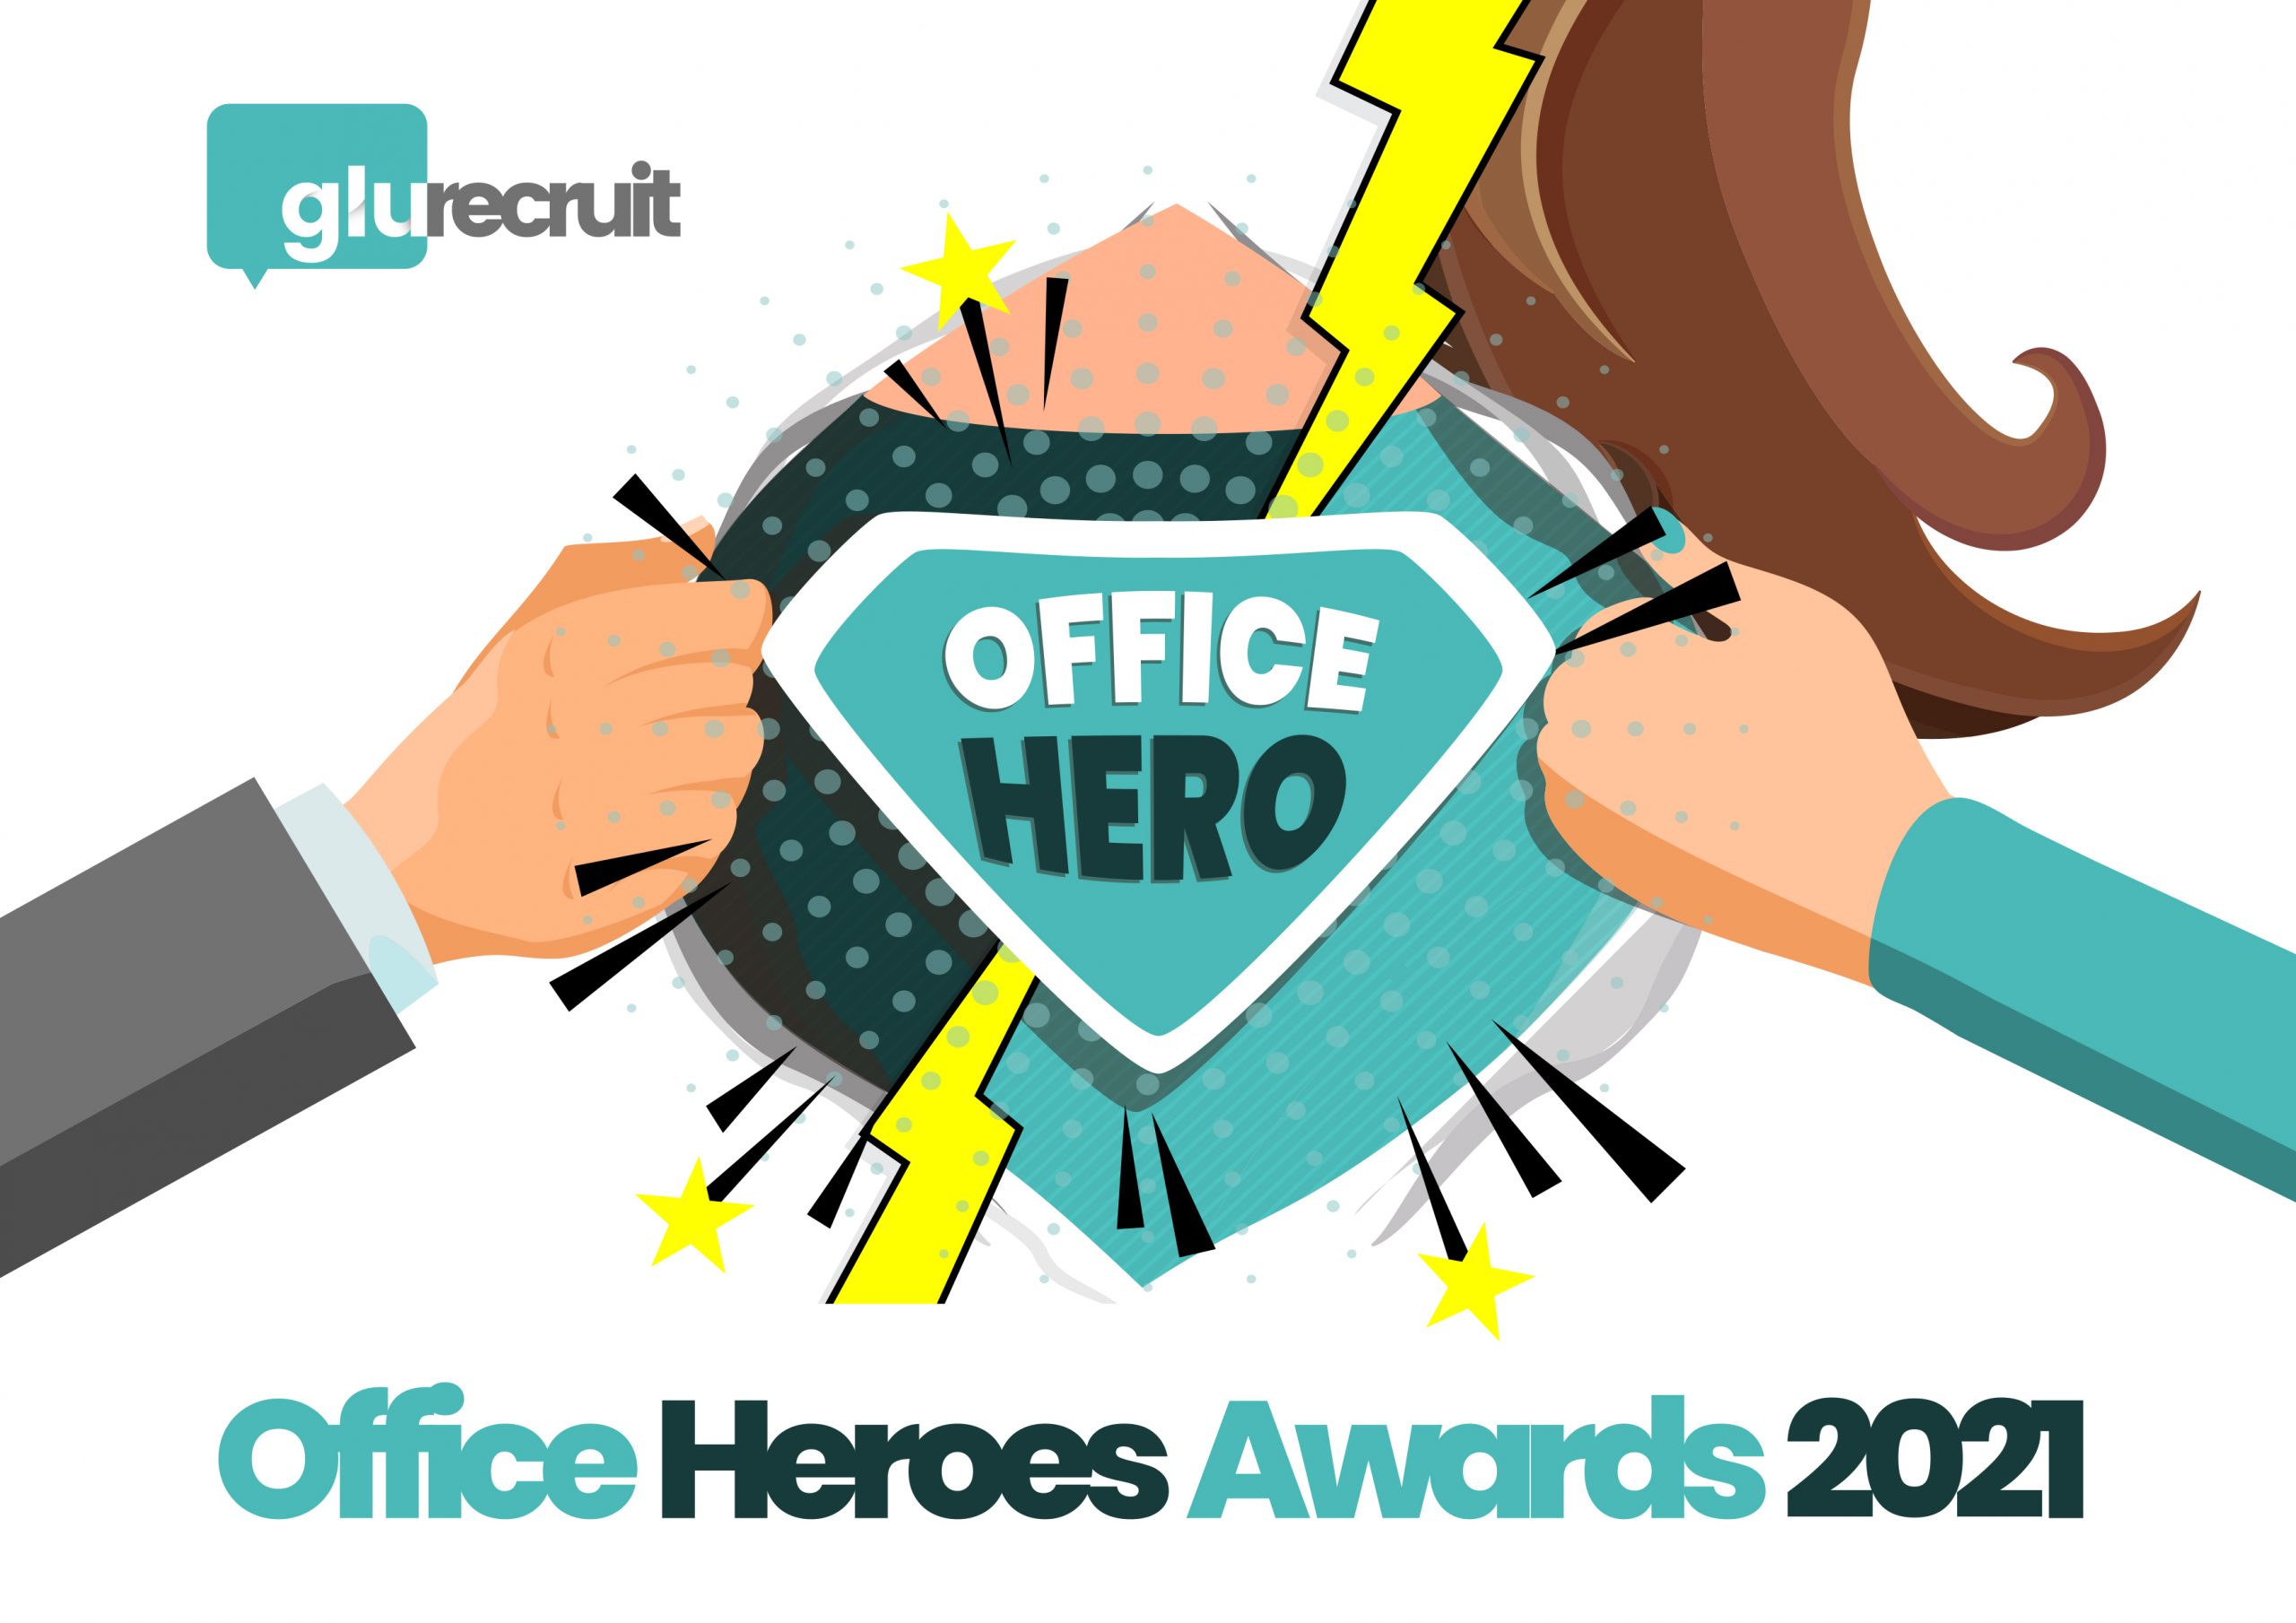 Do you have 2021s Office Hero?